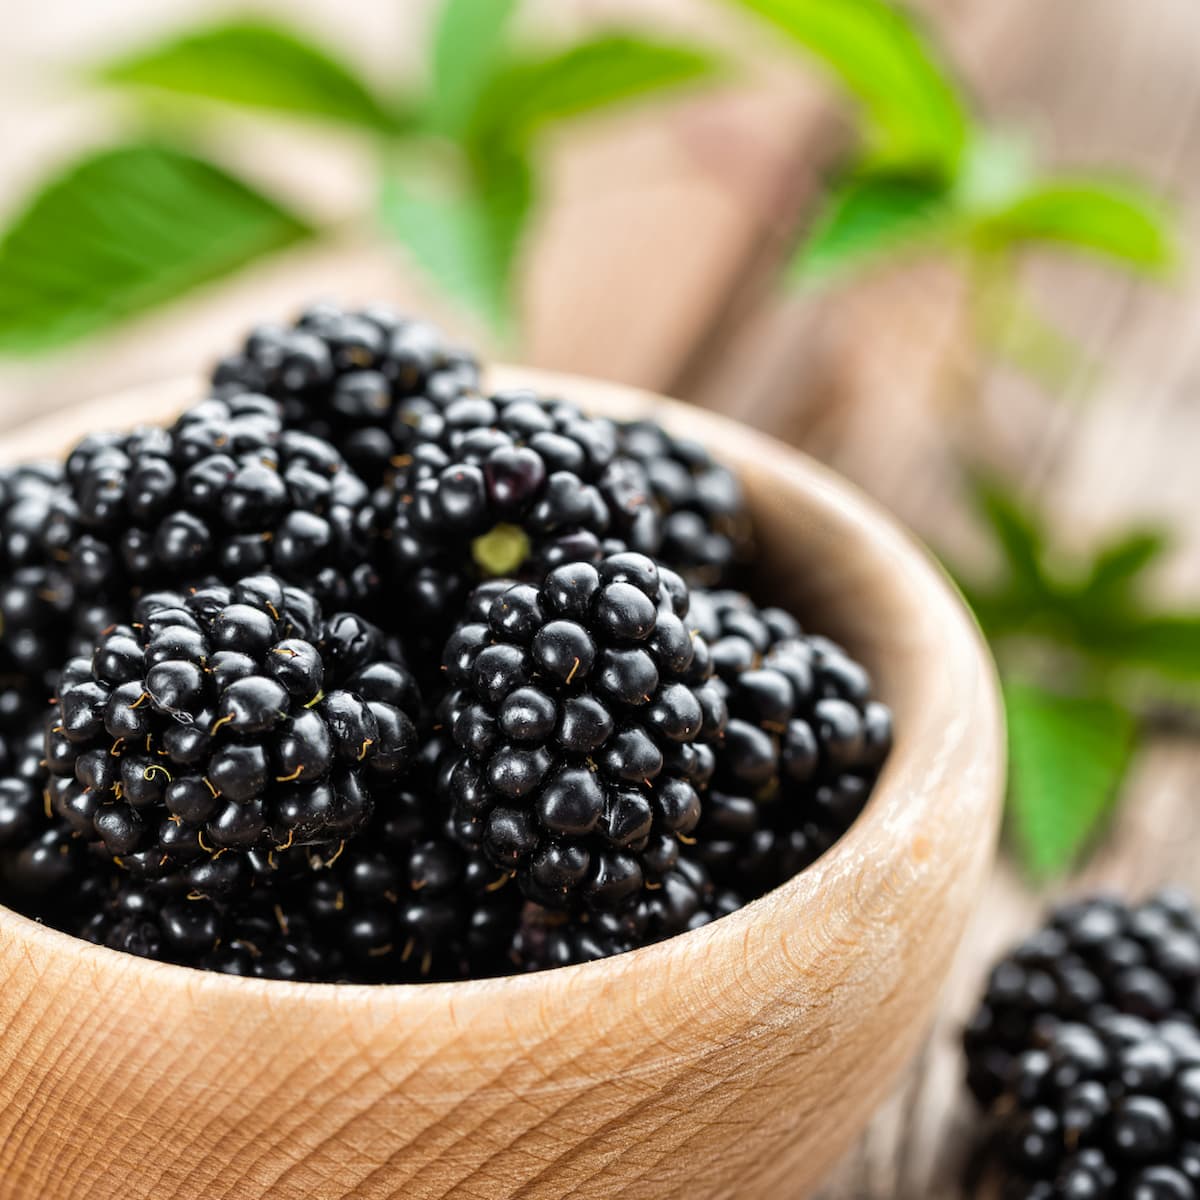 a square image of blackberries in a wooden bowl.